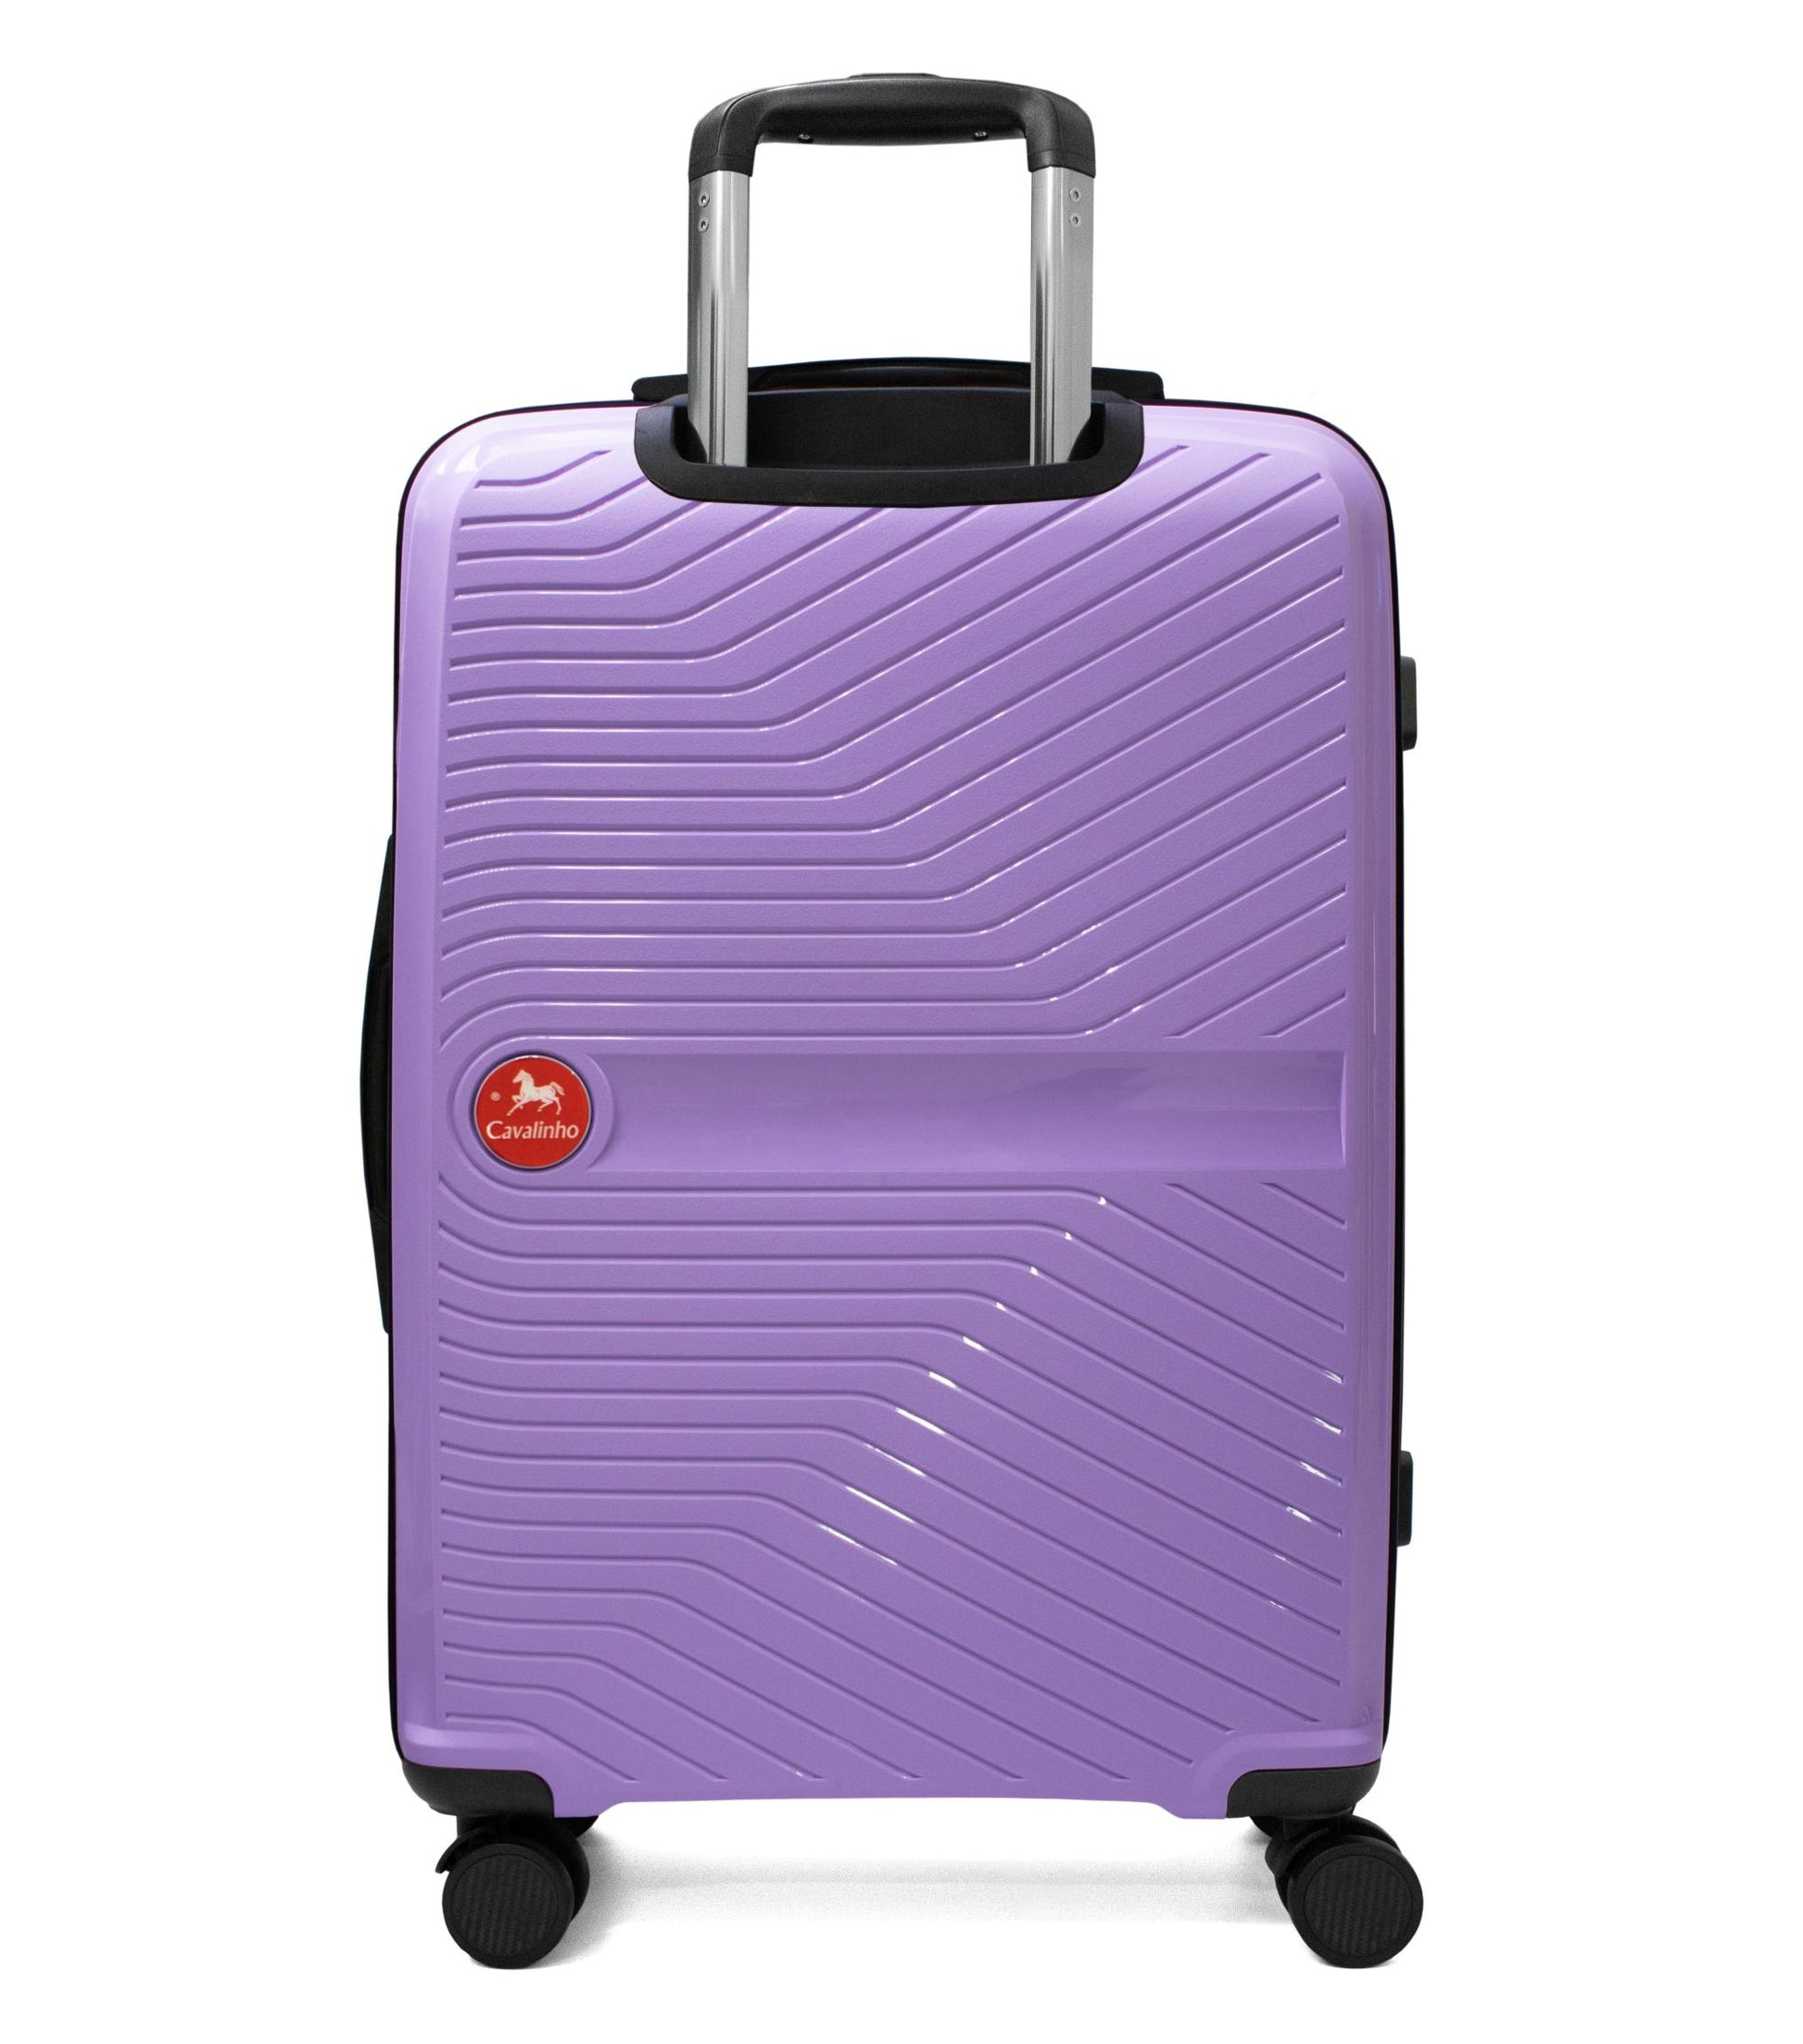 #color_ 24 inch Lilac | Cavalinho Colorful Check-in Hardside Luggage (24") - 24 inch Lilac - 68020004.39.24_3